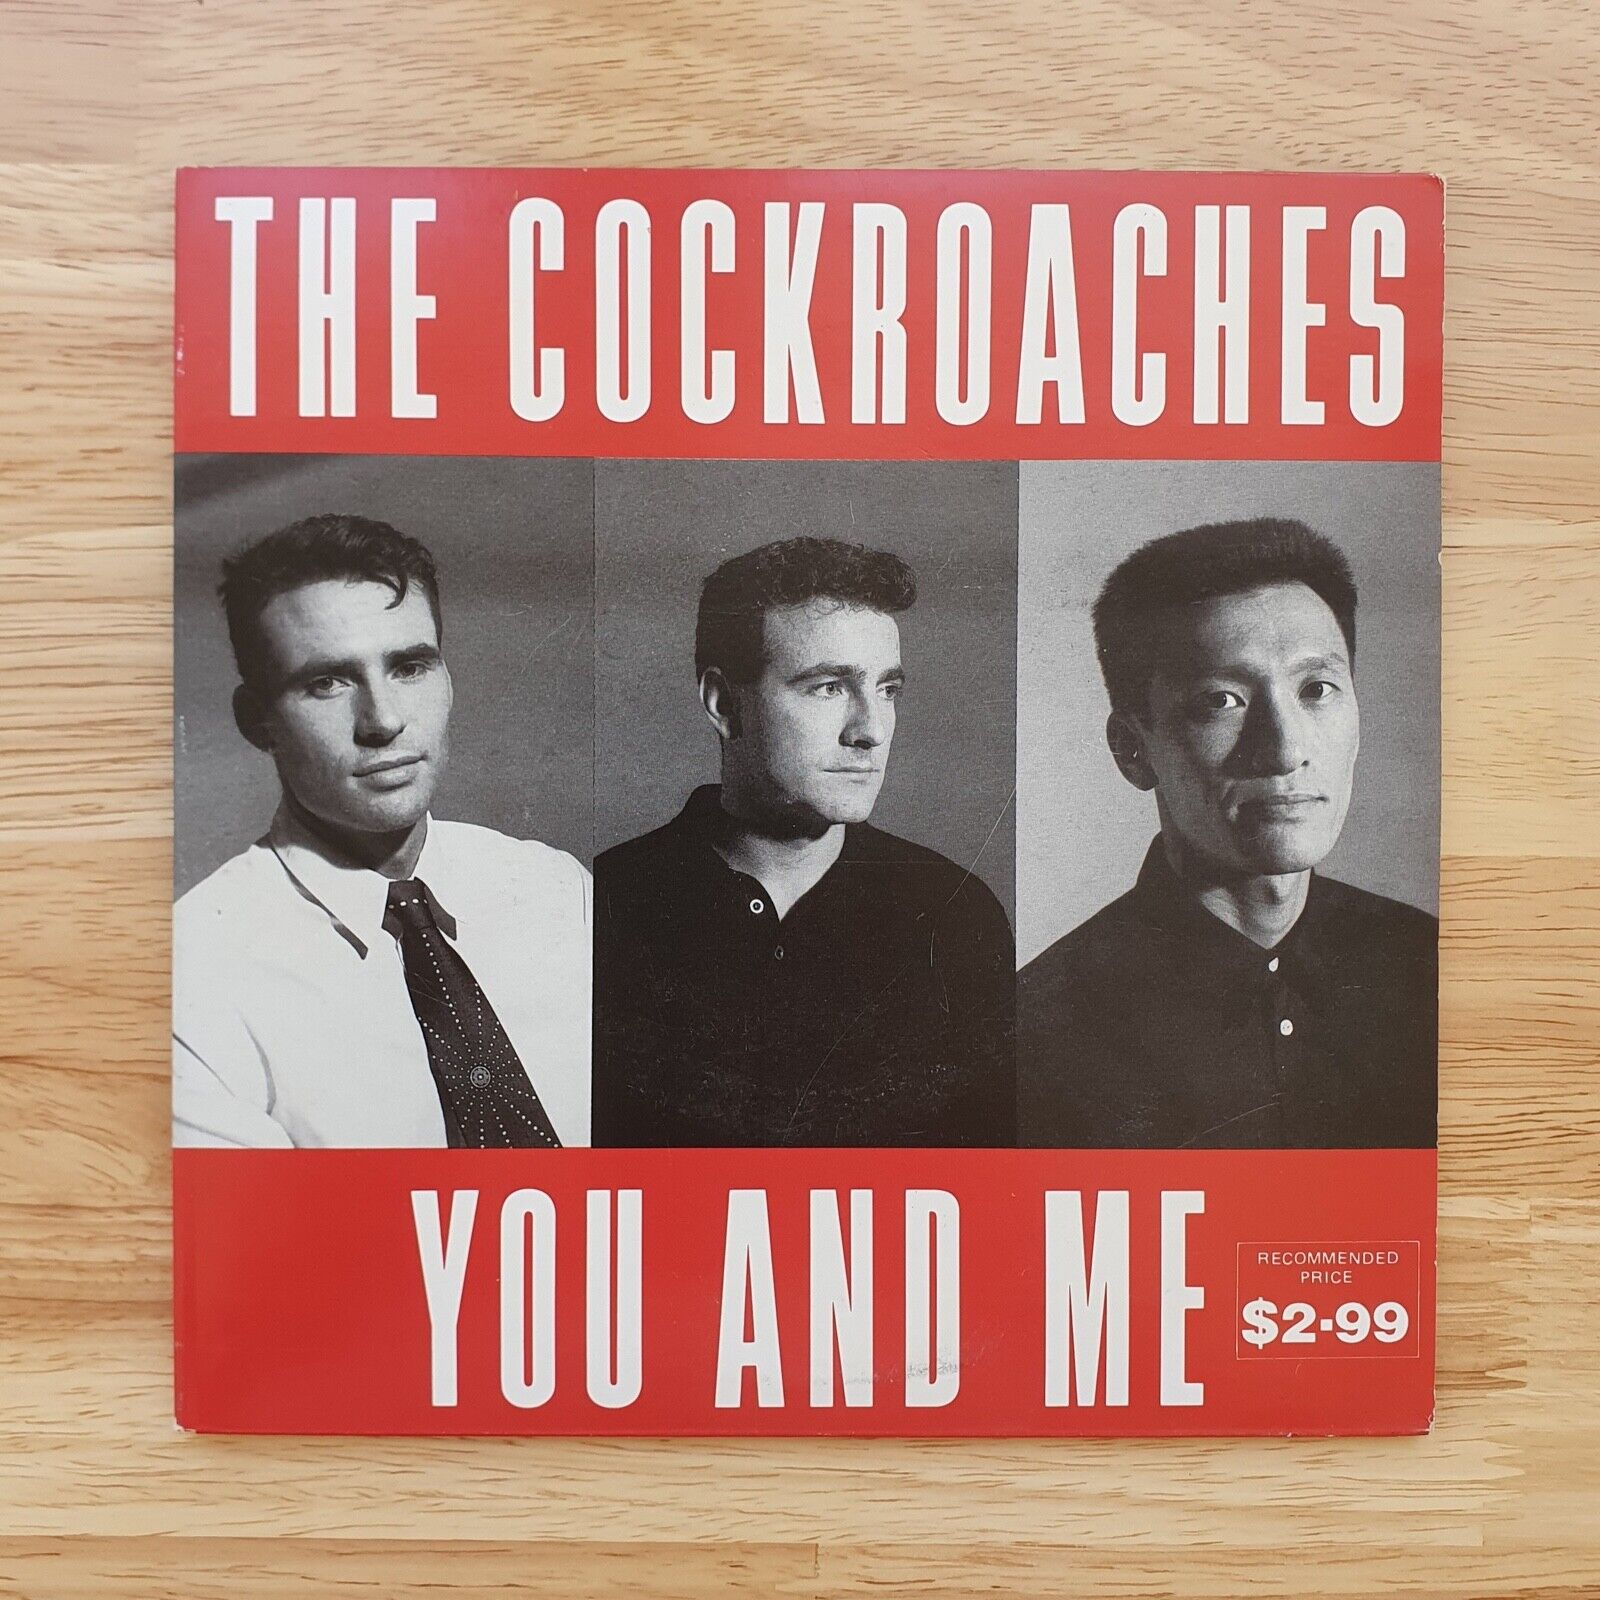 THE COCKROACHES - You And Me 2 x 7" Vinyl Single 1988 Wiggles